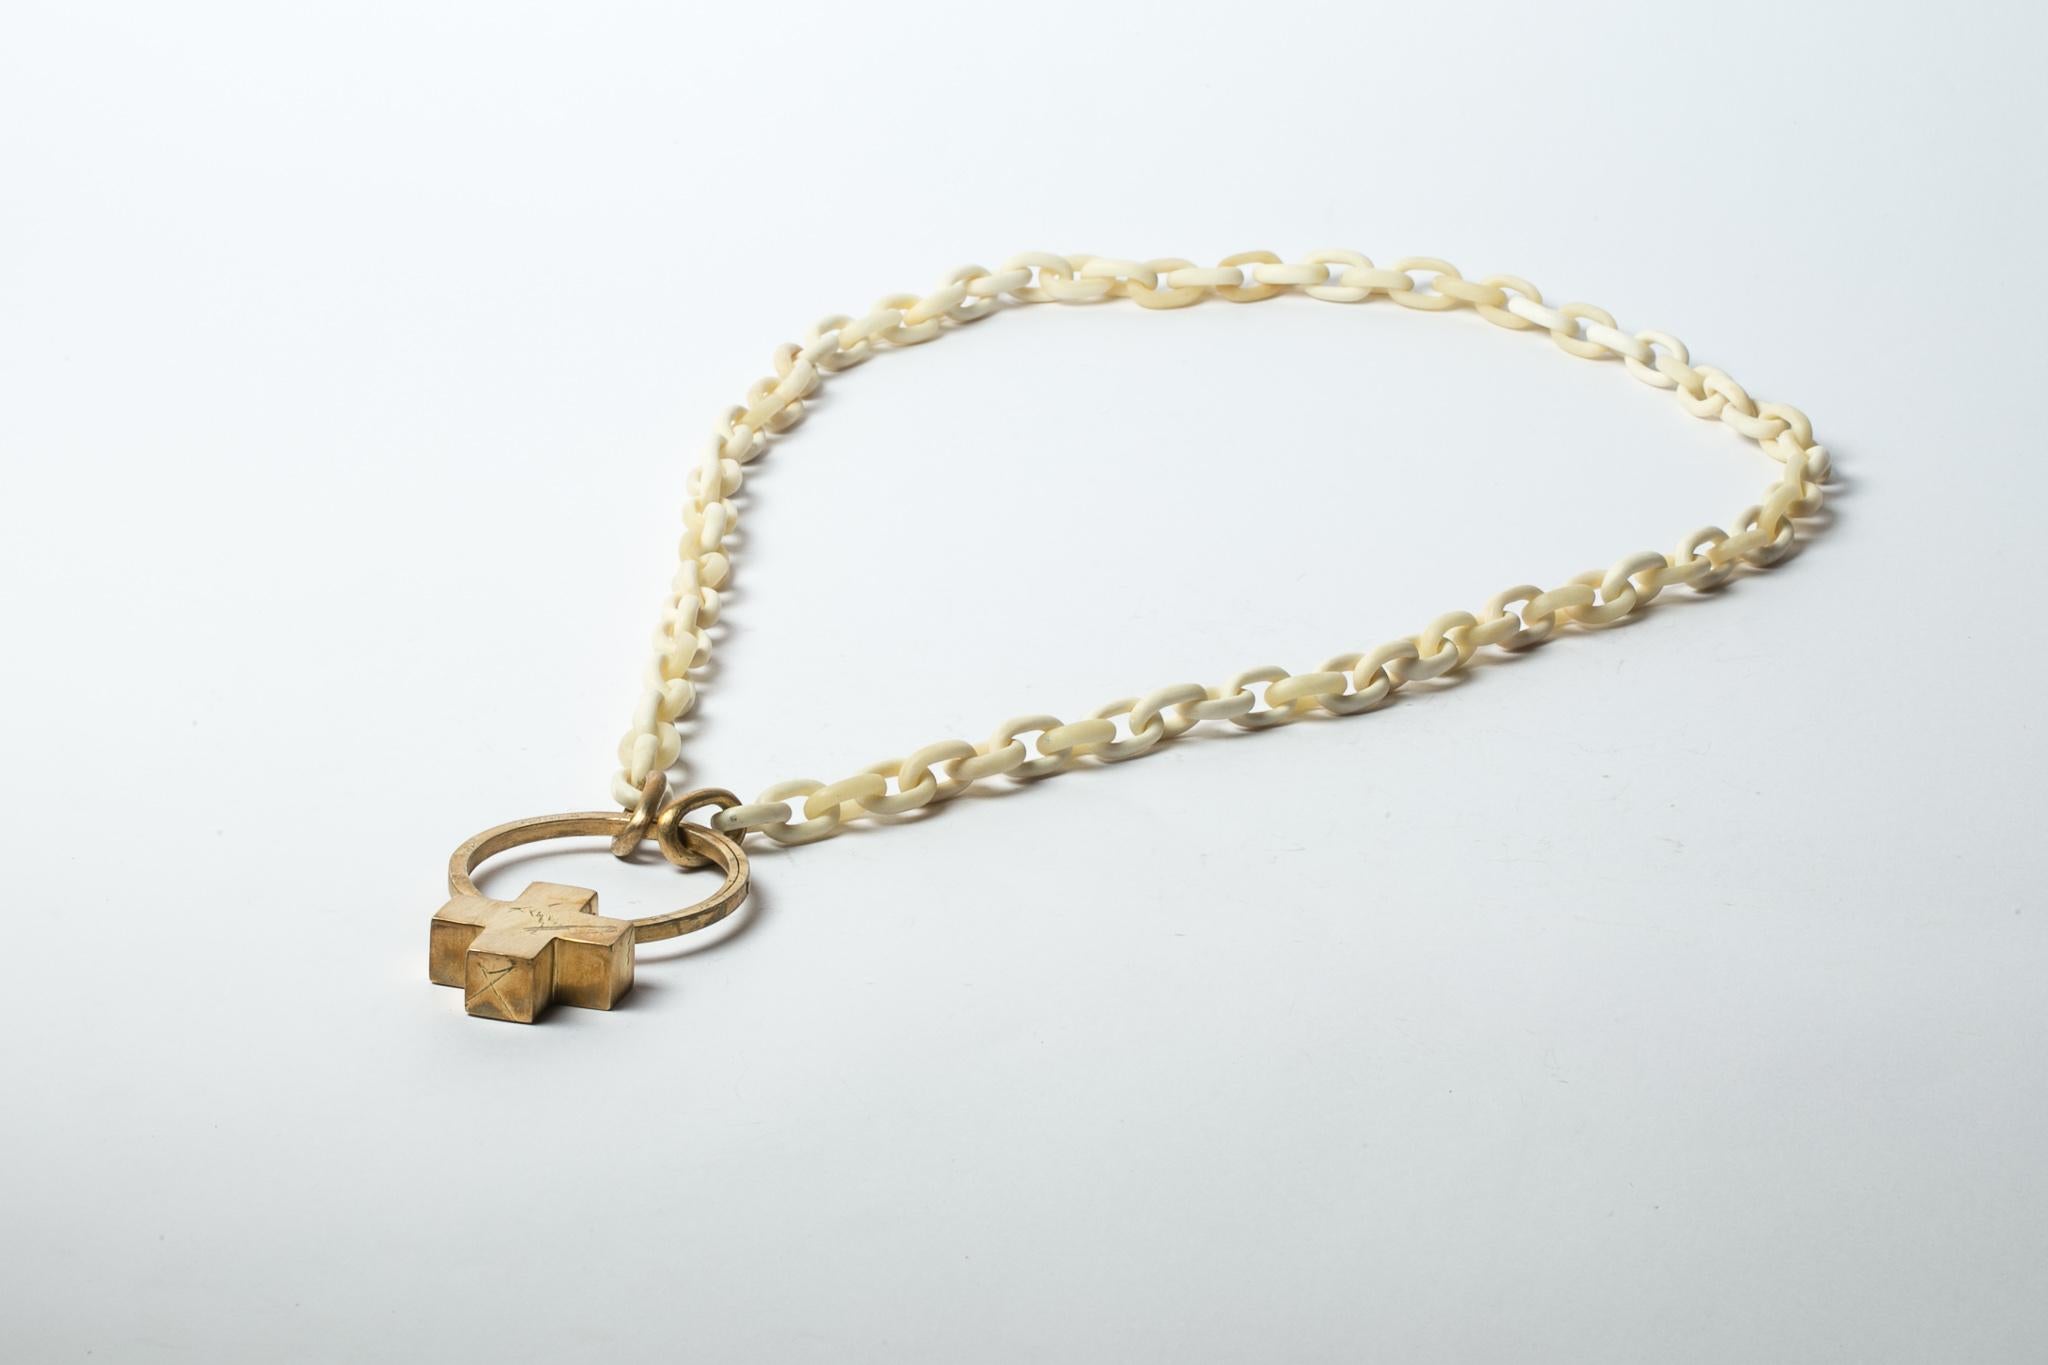 All organic chain is carved by hand. Chains made from bone are modeled and constructed into chain links. Brass substrate is electroplated with 18k gold and then dipped into acid to create the subtly destroyed surface.
The Charm System is an